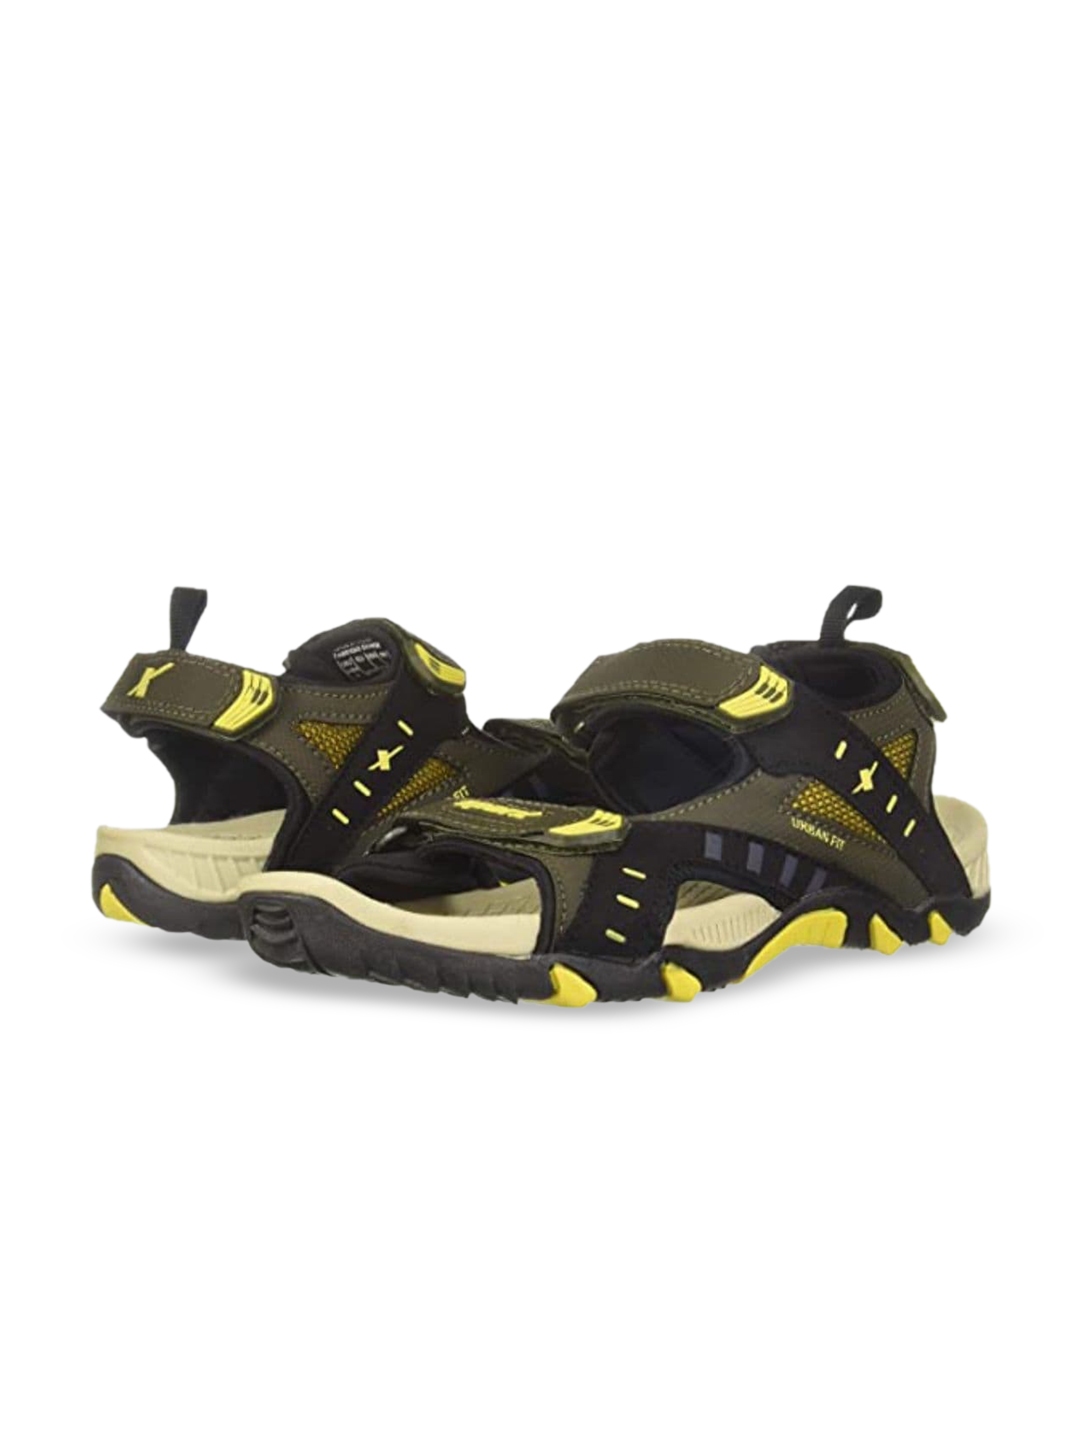 Buy Sparx Men Olive & Yellow Patterned Sports Sandals - Sports Sandals ...